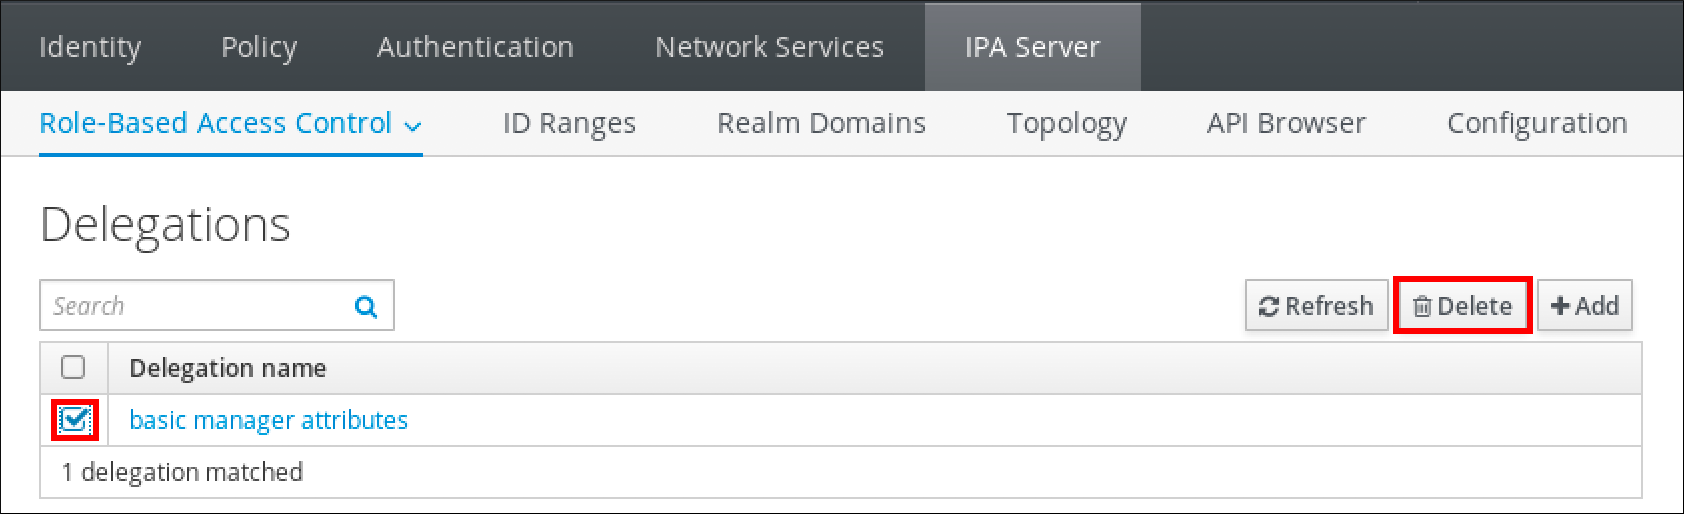 Screenshot of the "Role-Based Access Control" sub-menu of the "IPA Server" tab. The "Delegations" page displays a table with Delegation names and the checkbox for the "basic manager attributes" entry has been checked. The "Delete" button has been highlighted.